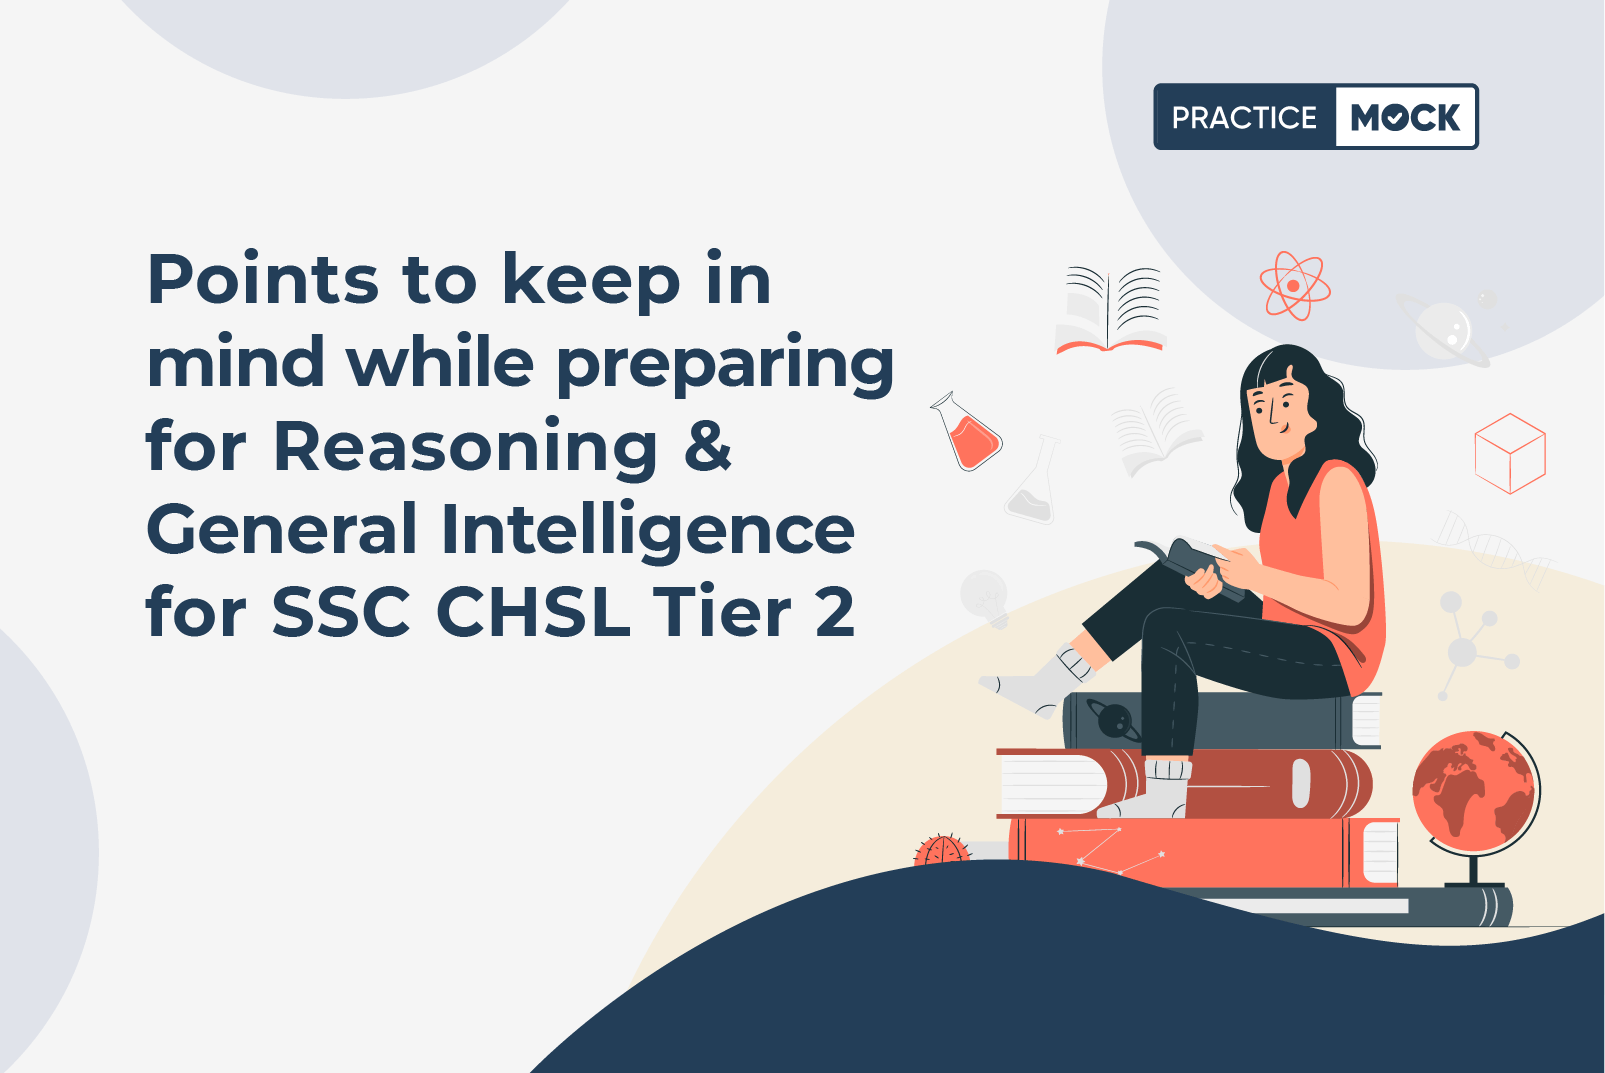 Points to keep in mind while preparing for Reasoning and General Intelligence for SSC CHSL Tier 2 exam